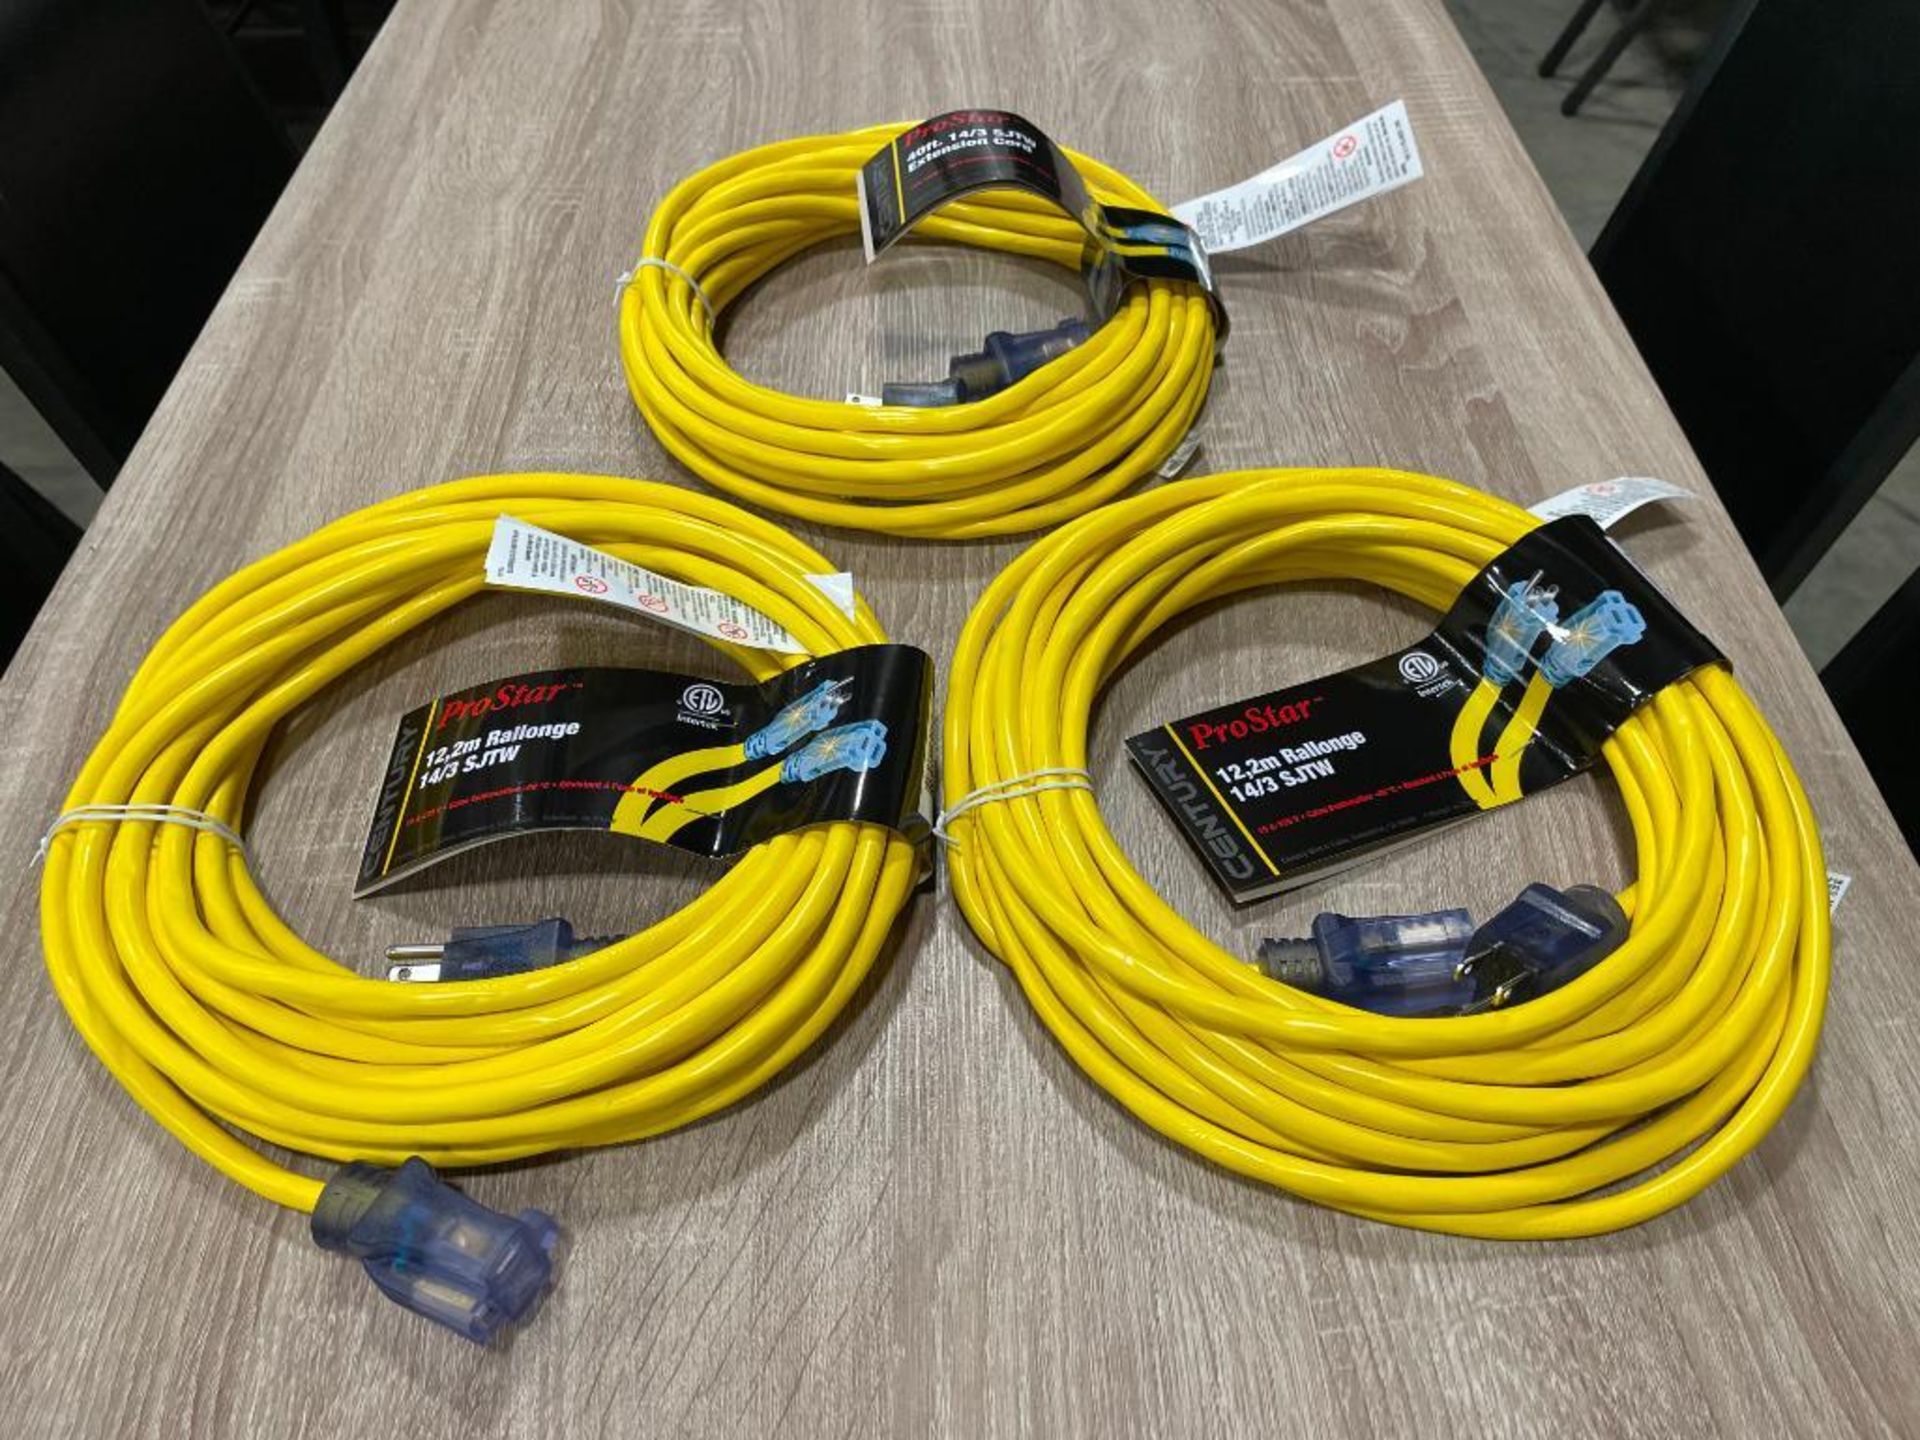 CENTURY, PRO STAR - 40' 14/3 SJTW EXTENSION CORD YELLOW - NEW - LOT OF 3